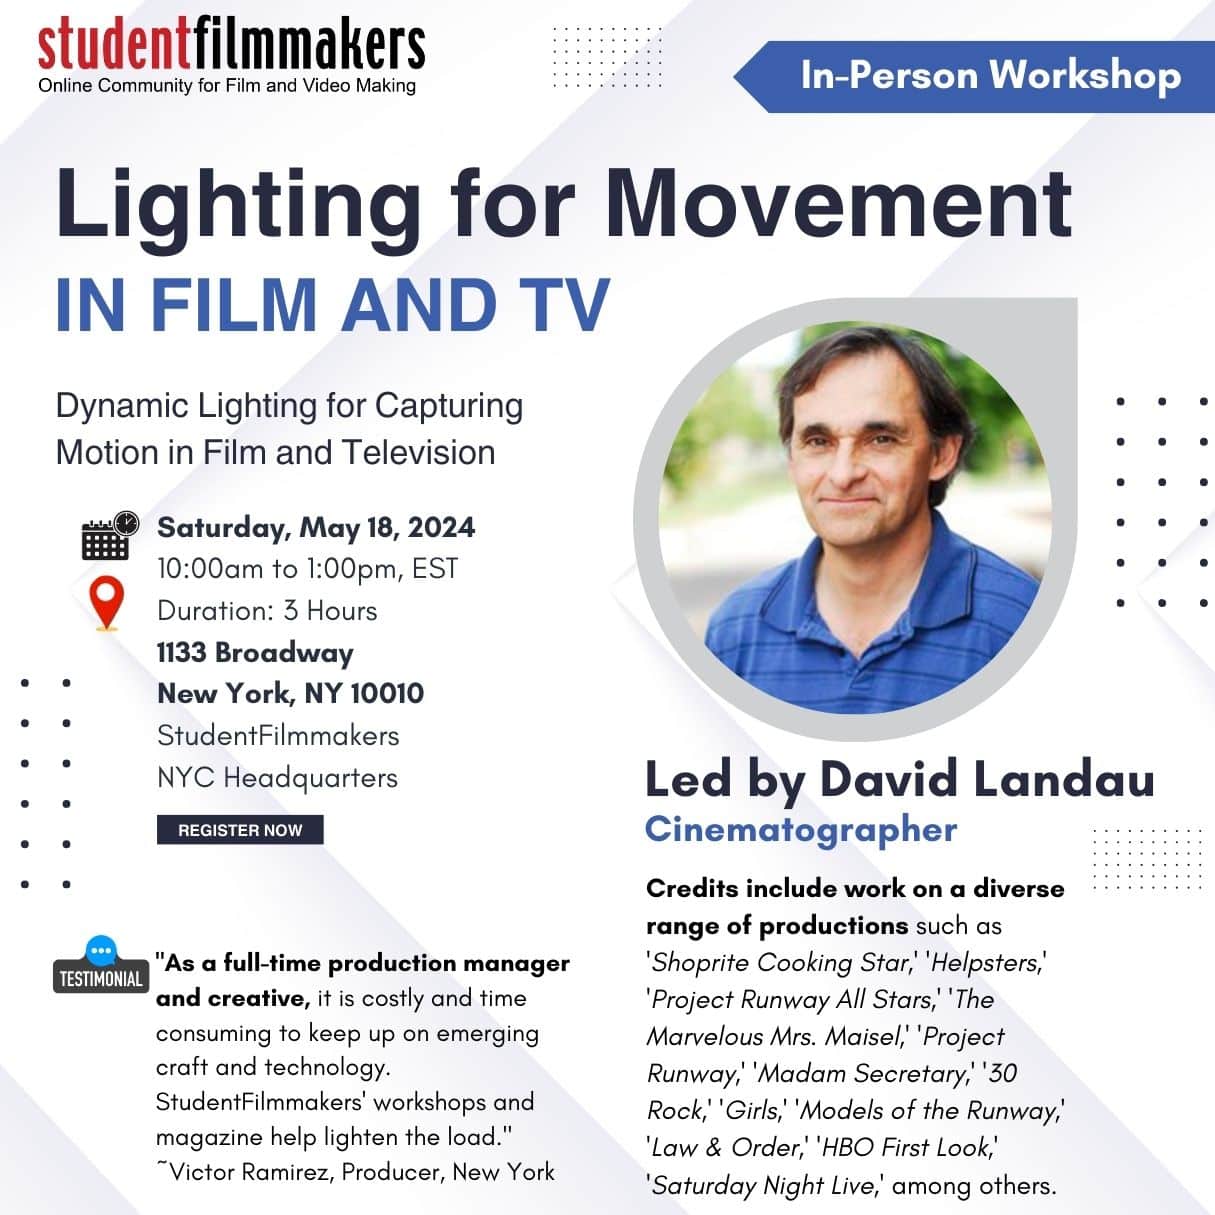 In-Person Workshop – “Lighting for Movement in Film and TV” Led by David Landau – Manhattan, NYC, New York